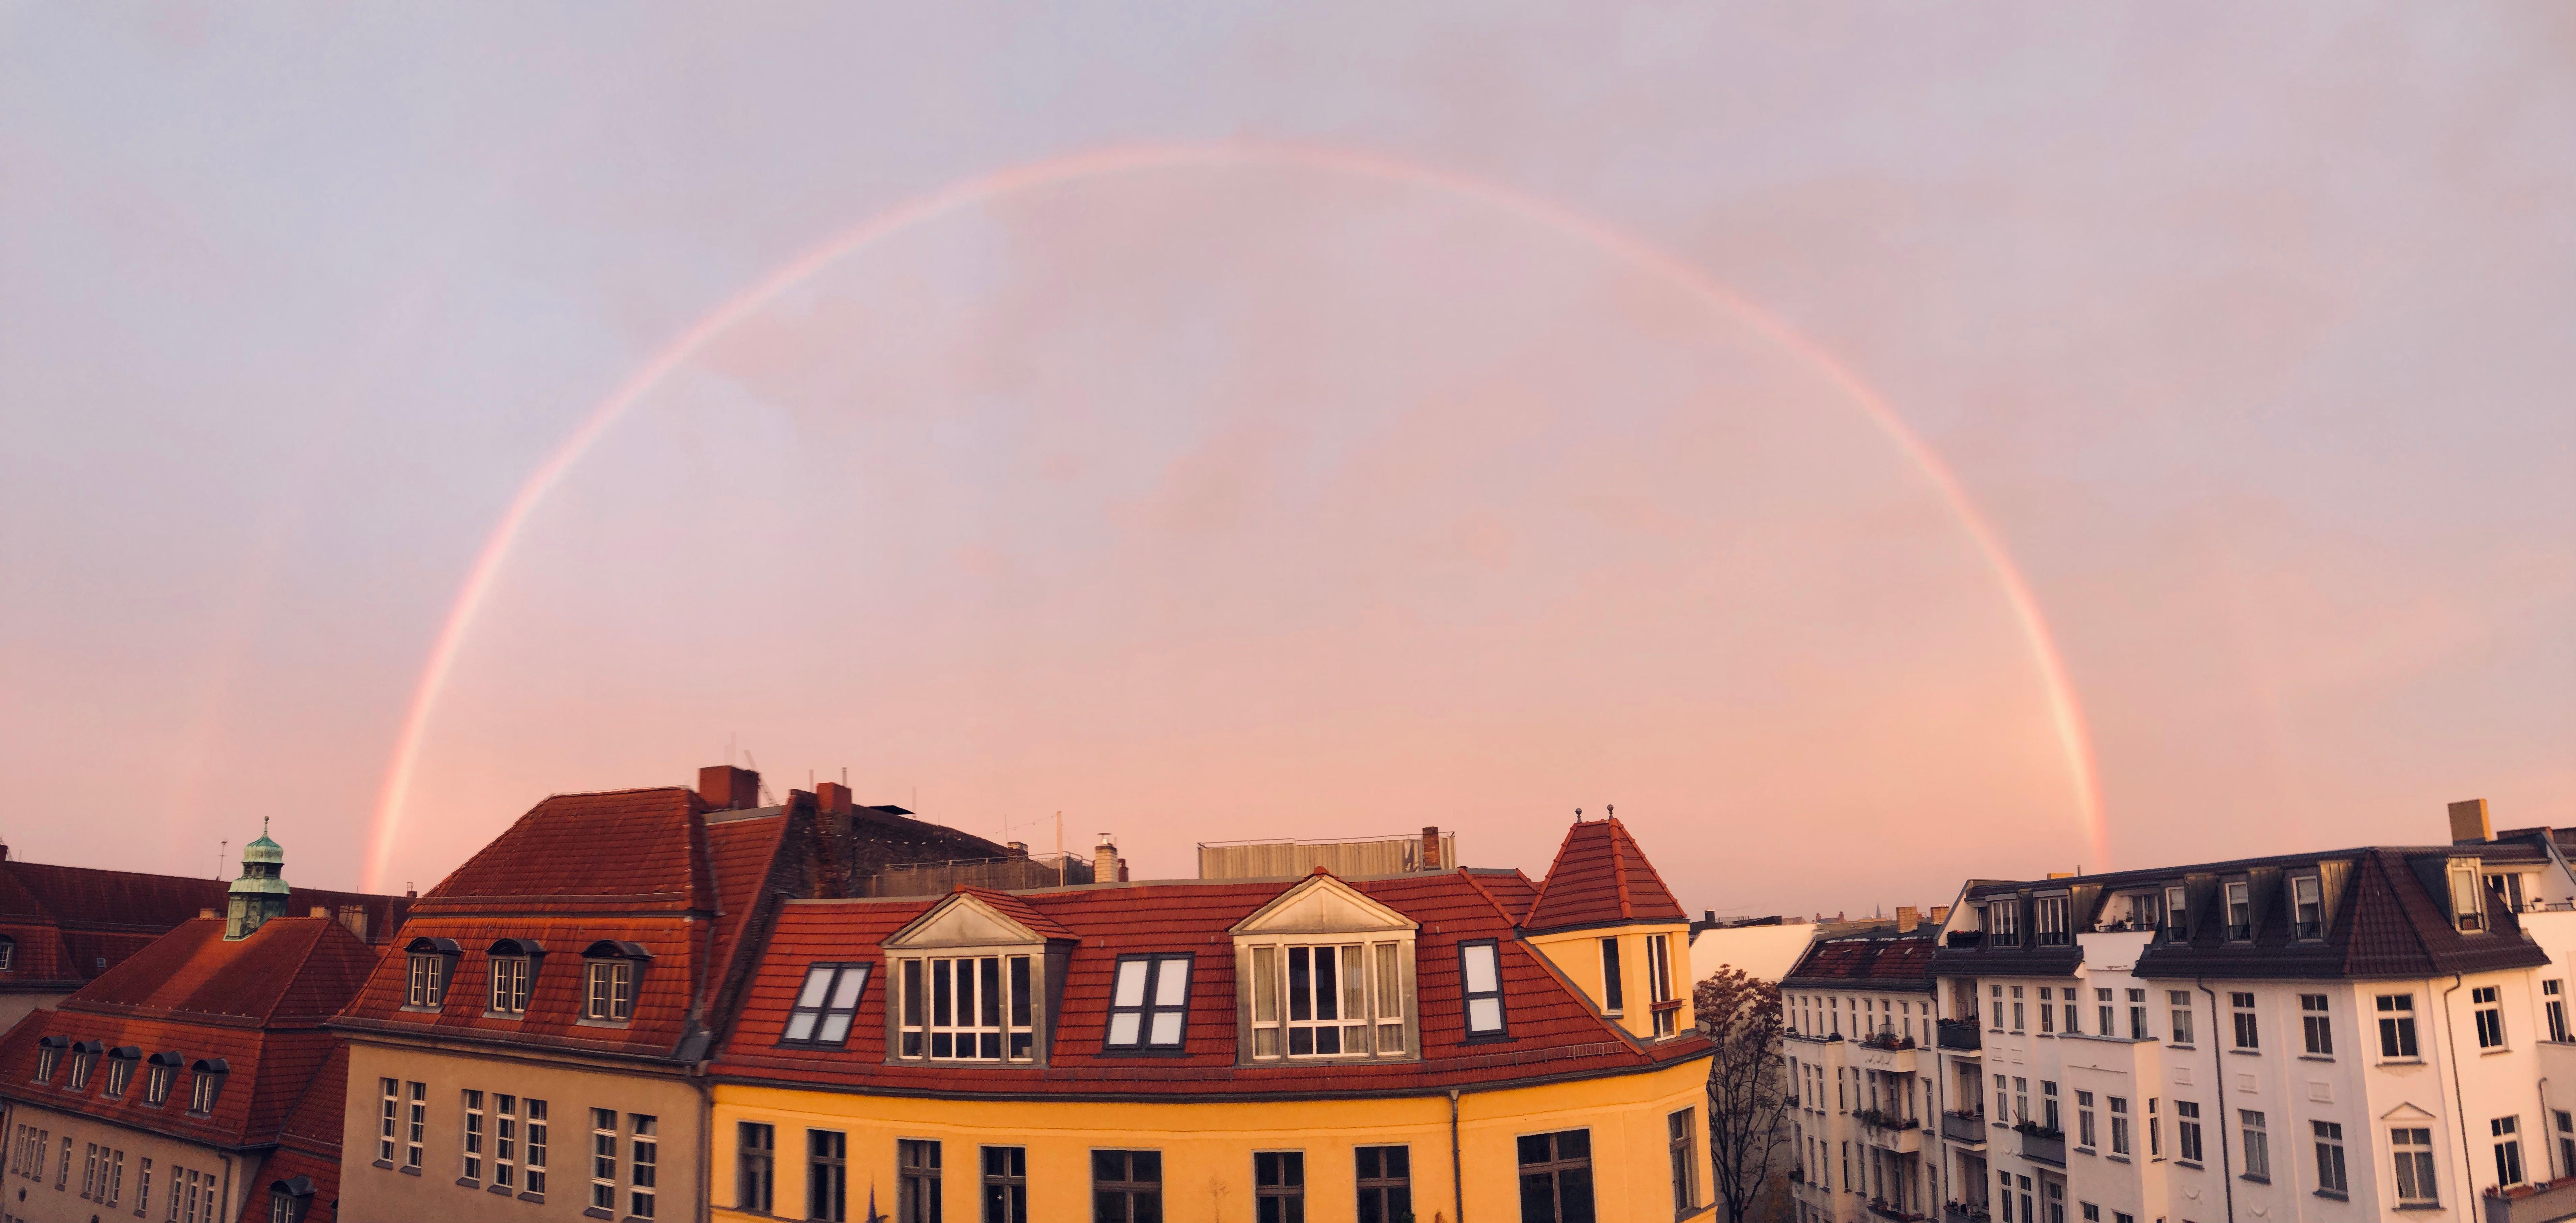 Waking up at 7AM to this rainbow makes life more beautiful 🌈 #berlin #home #rooftop #rainbow